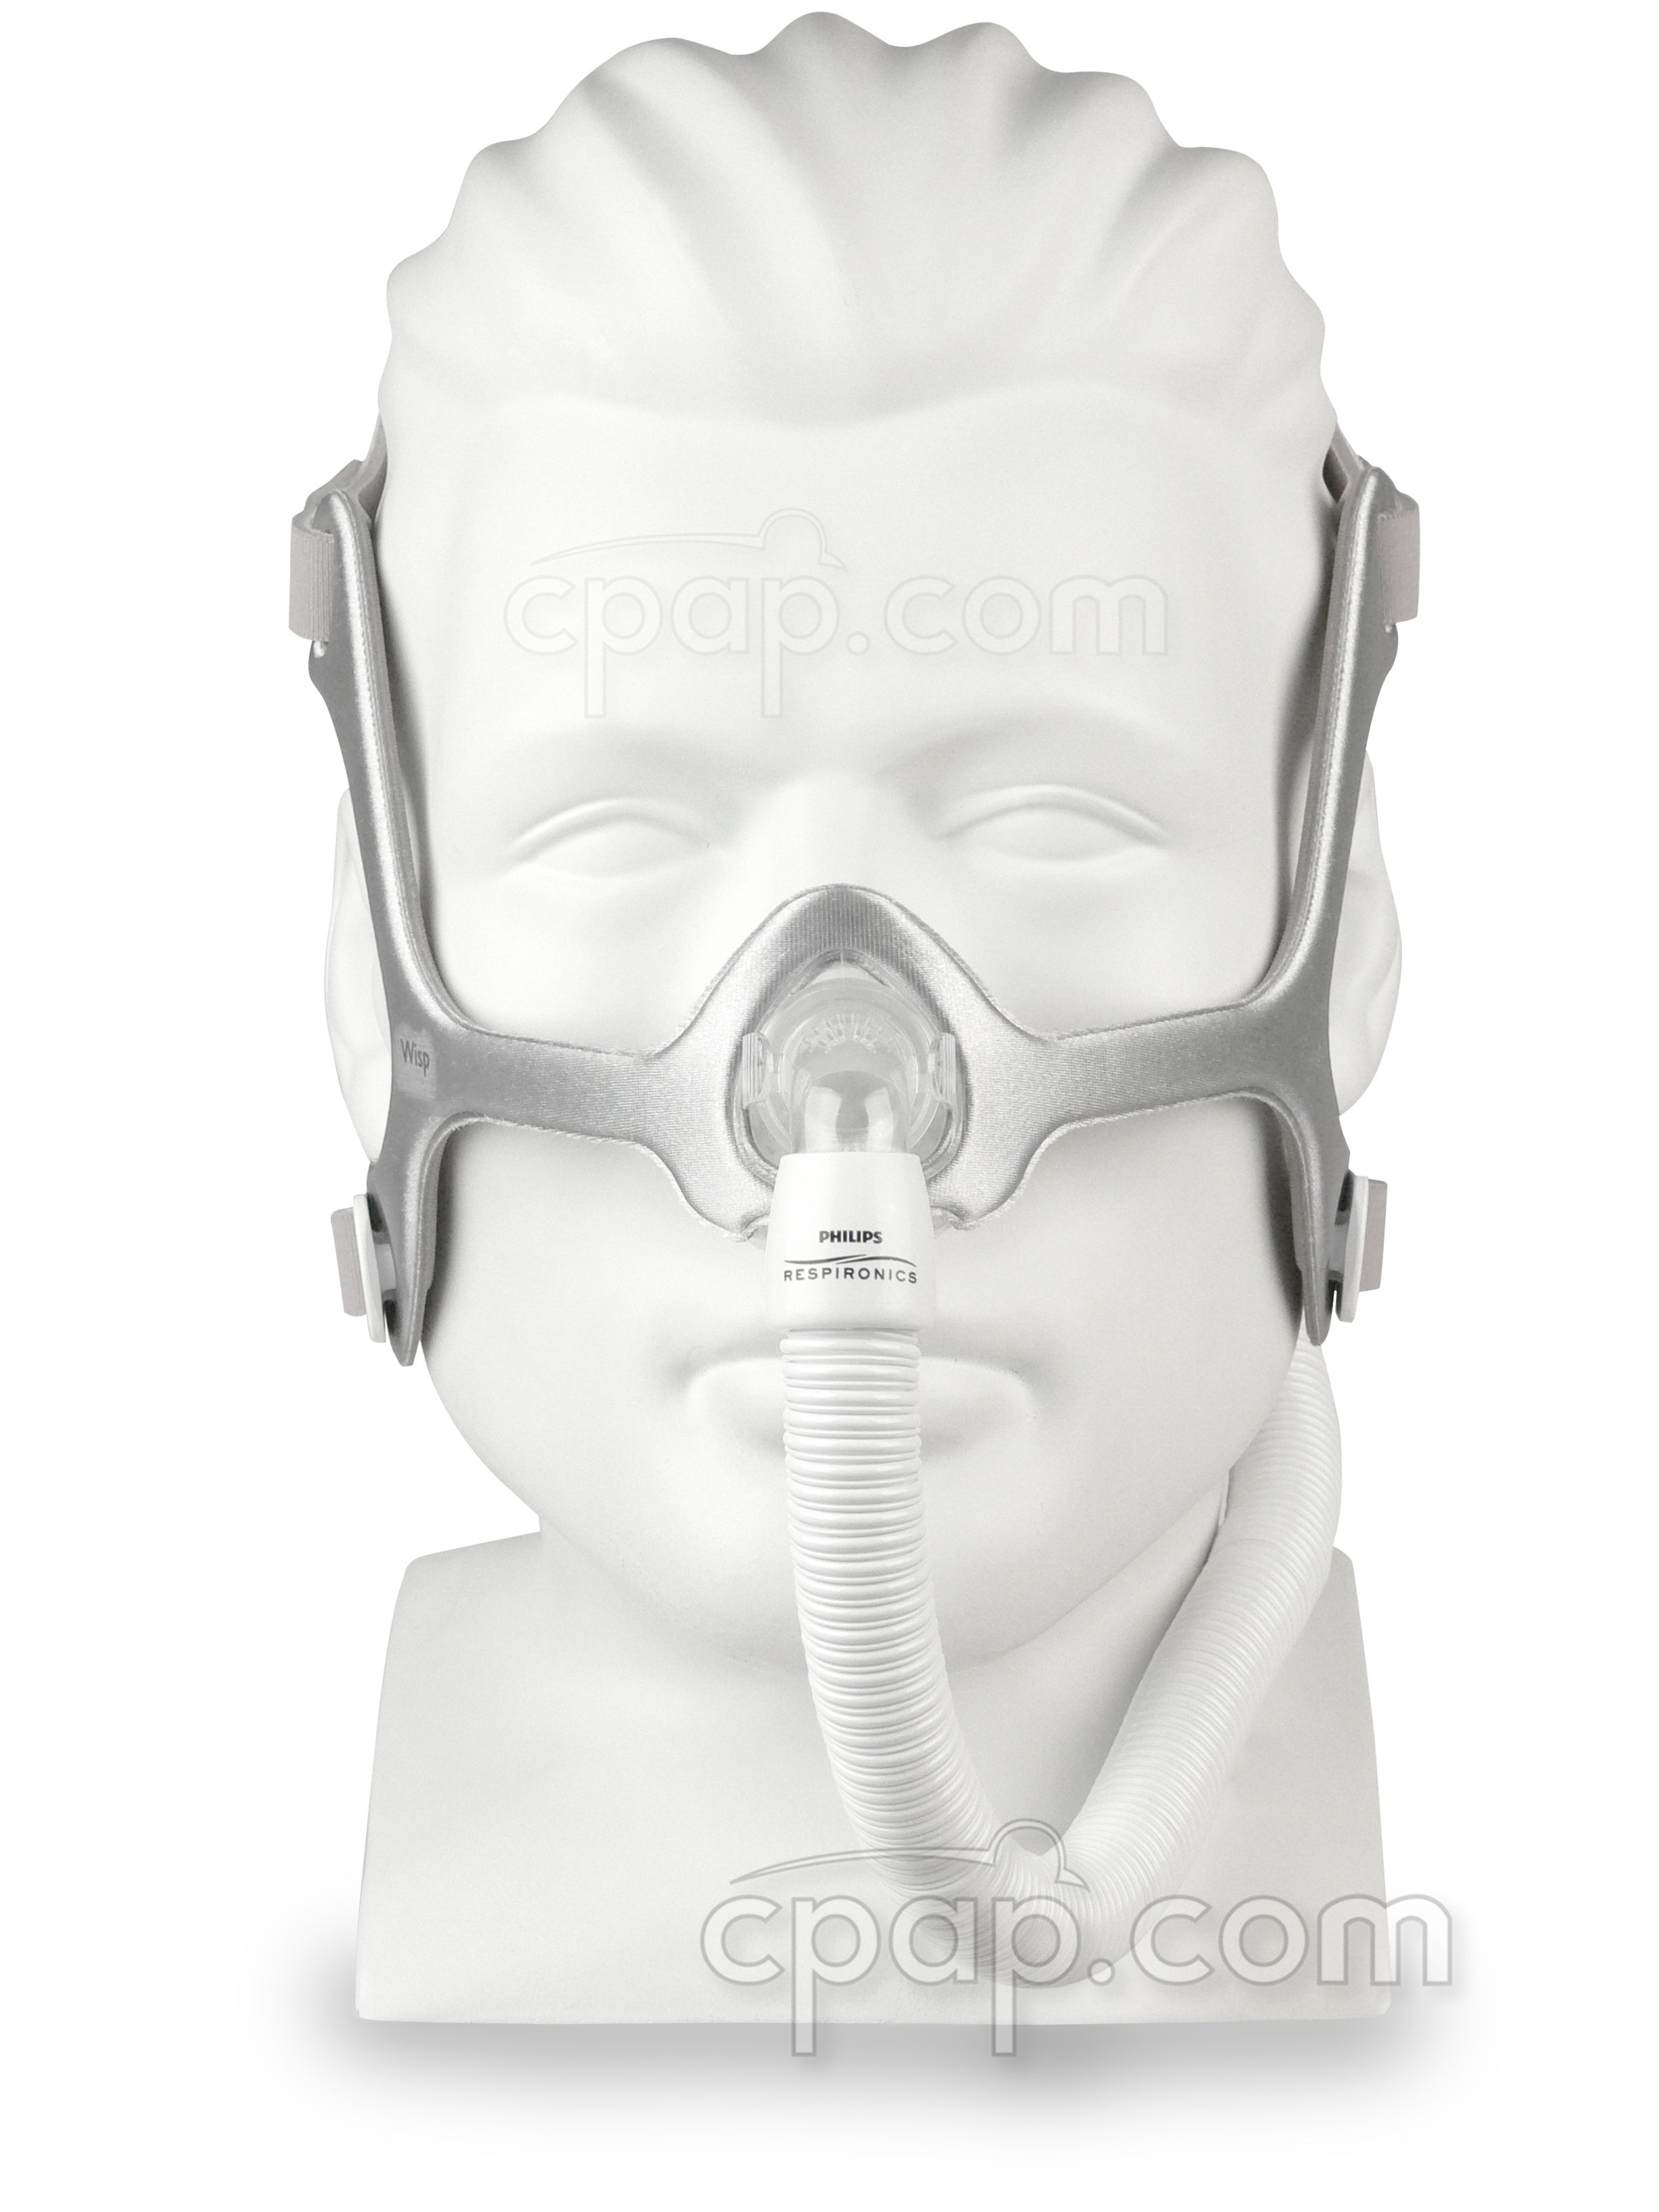 Placeret venskab give Philips Respironics Wisp Nasal CPAP Mask with Headgear - Fit Pack | CPAP.com